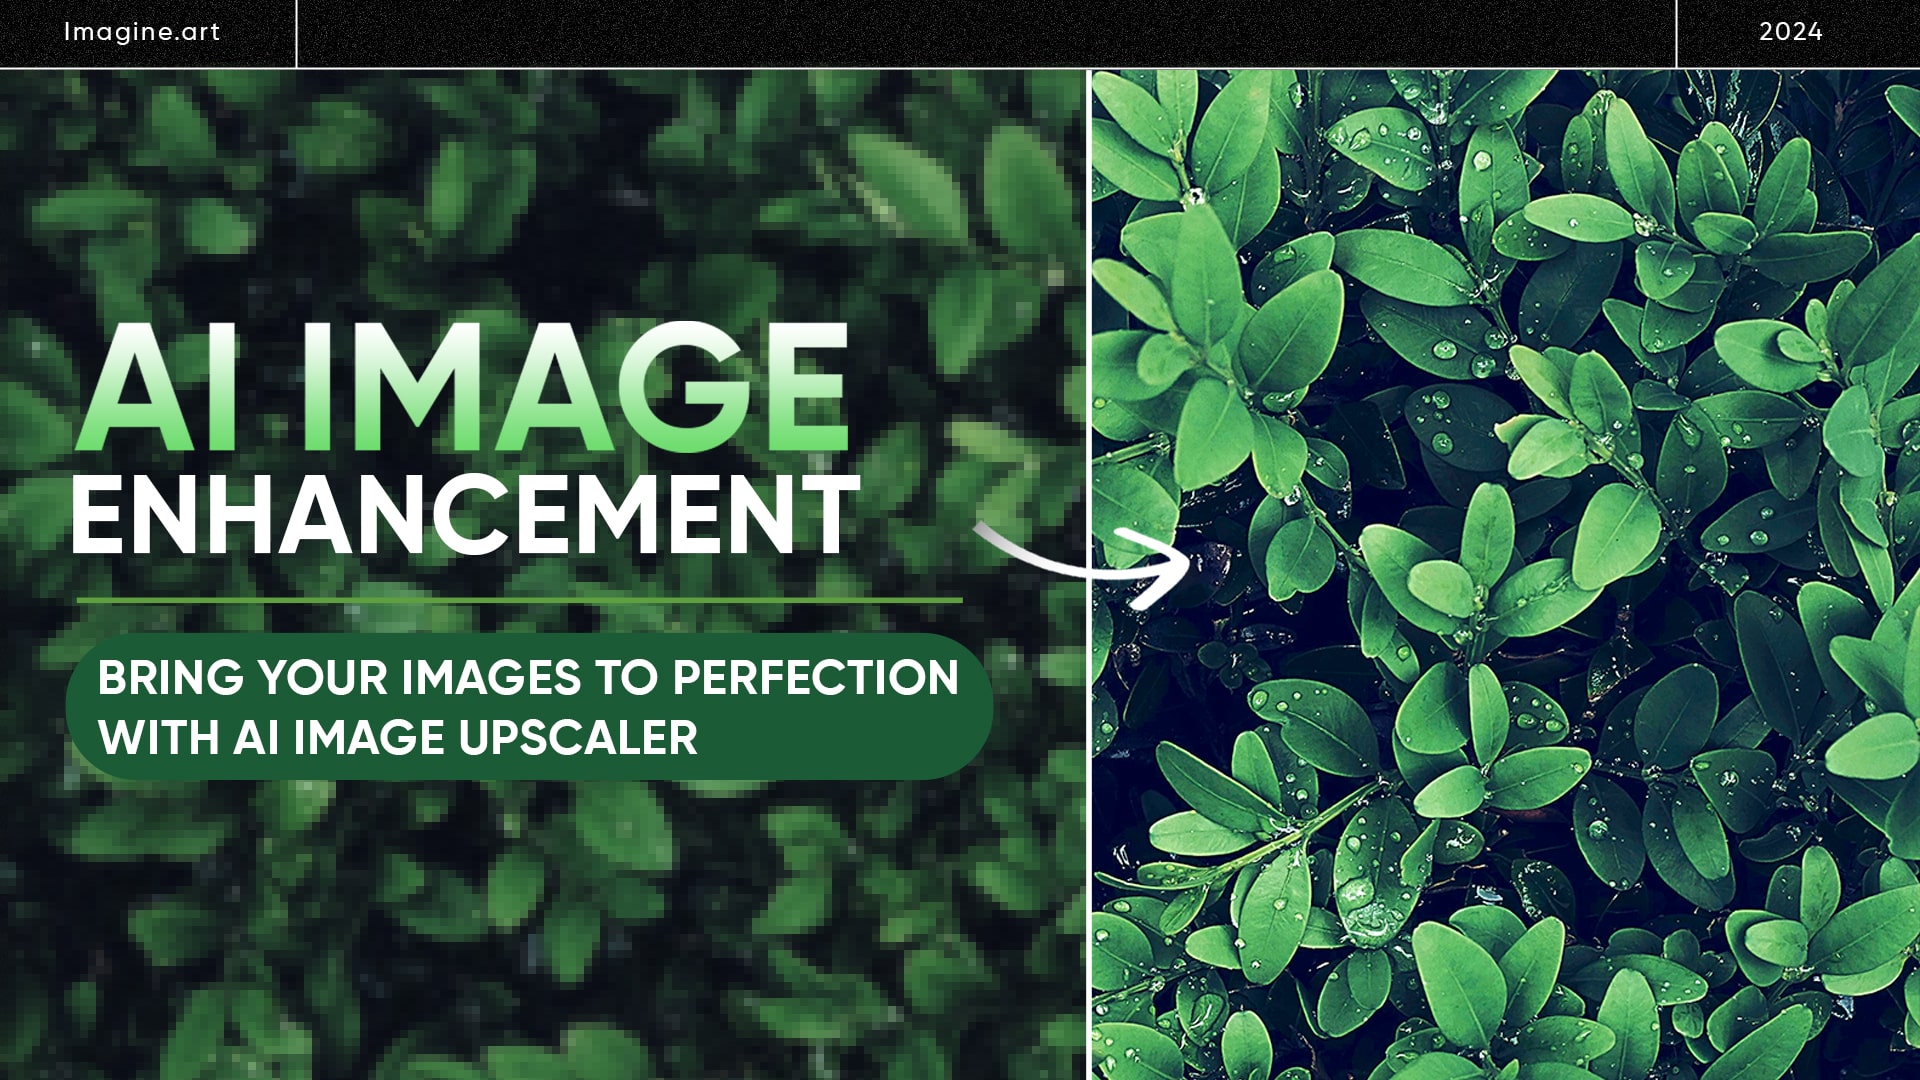 AI Image Enhancement: Bring your images to perfection with AI Image Upscaler